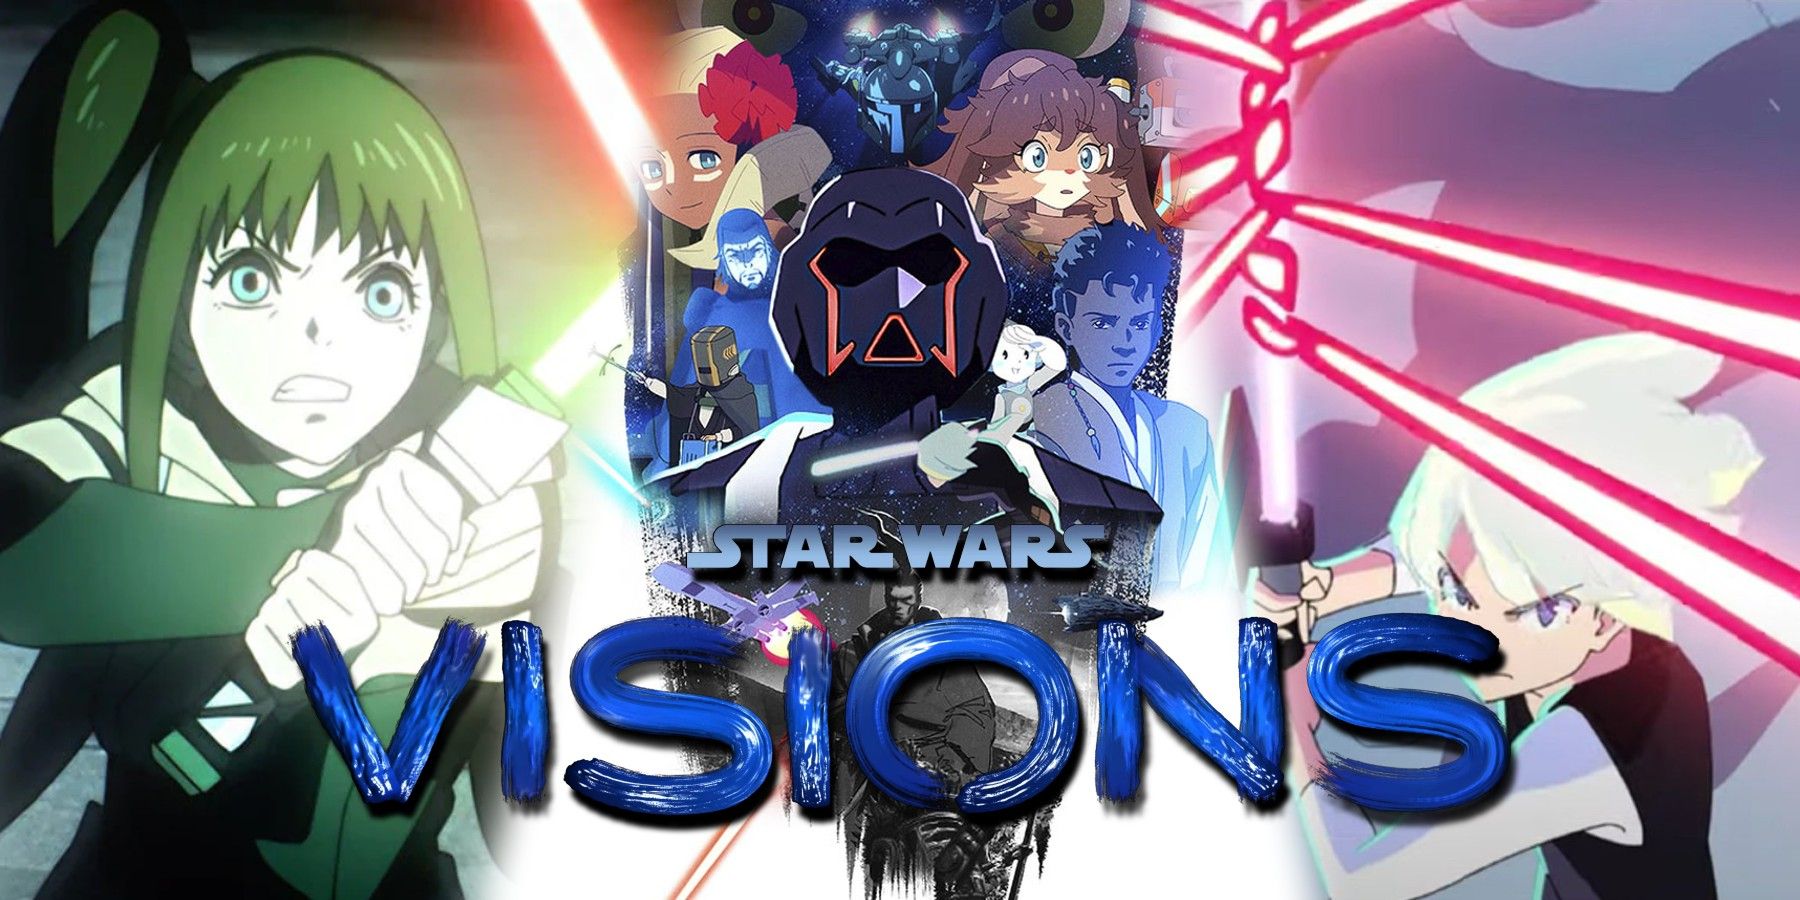 Star Wars Visions anime anthology comes to Disney on September 22nd   Engadget